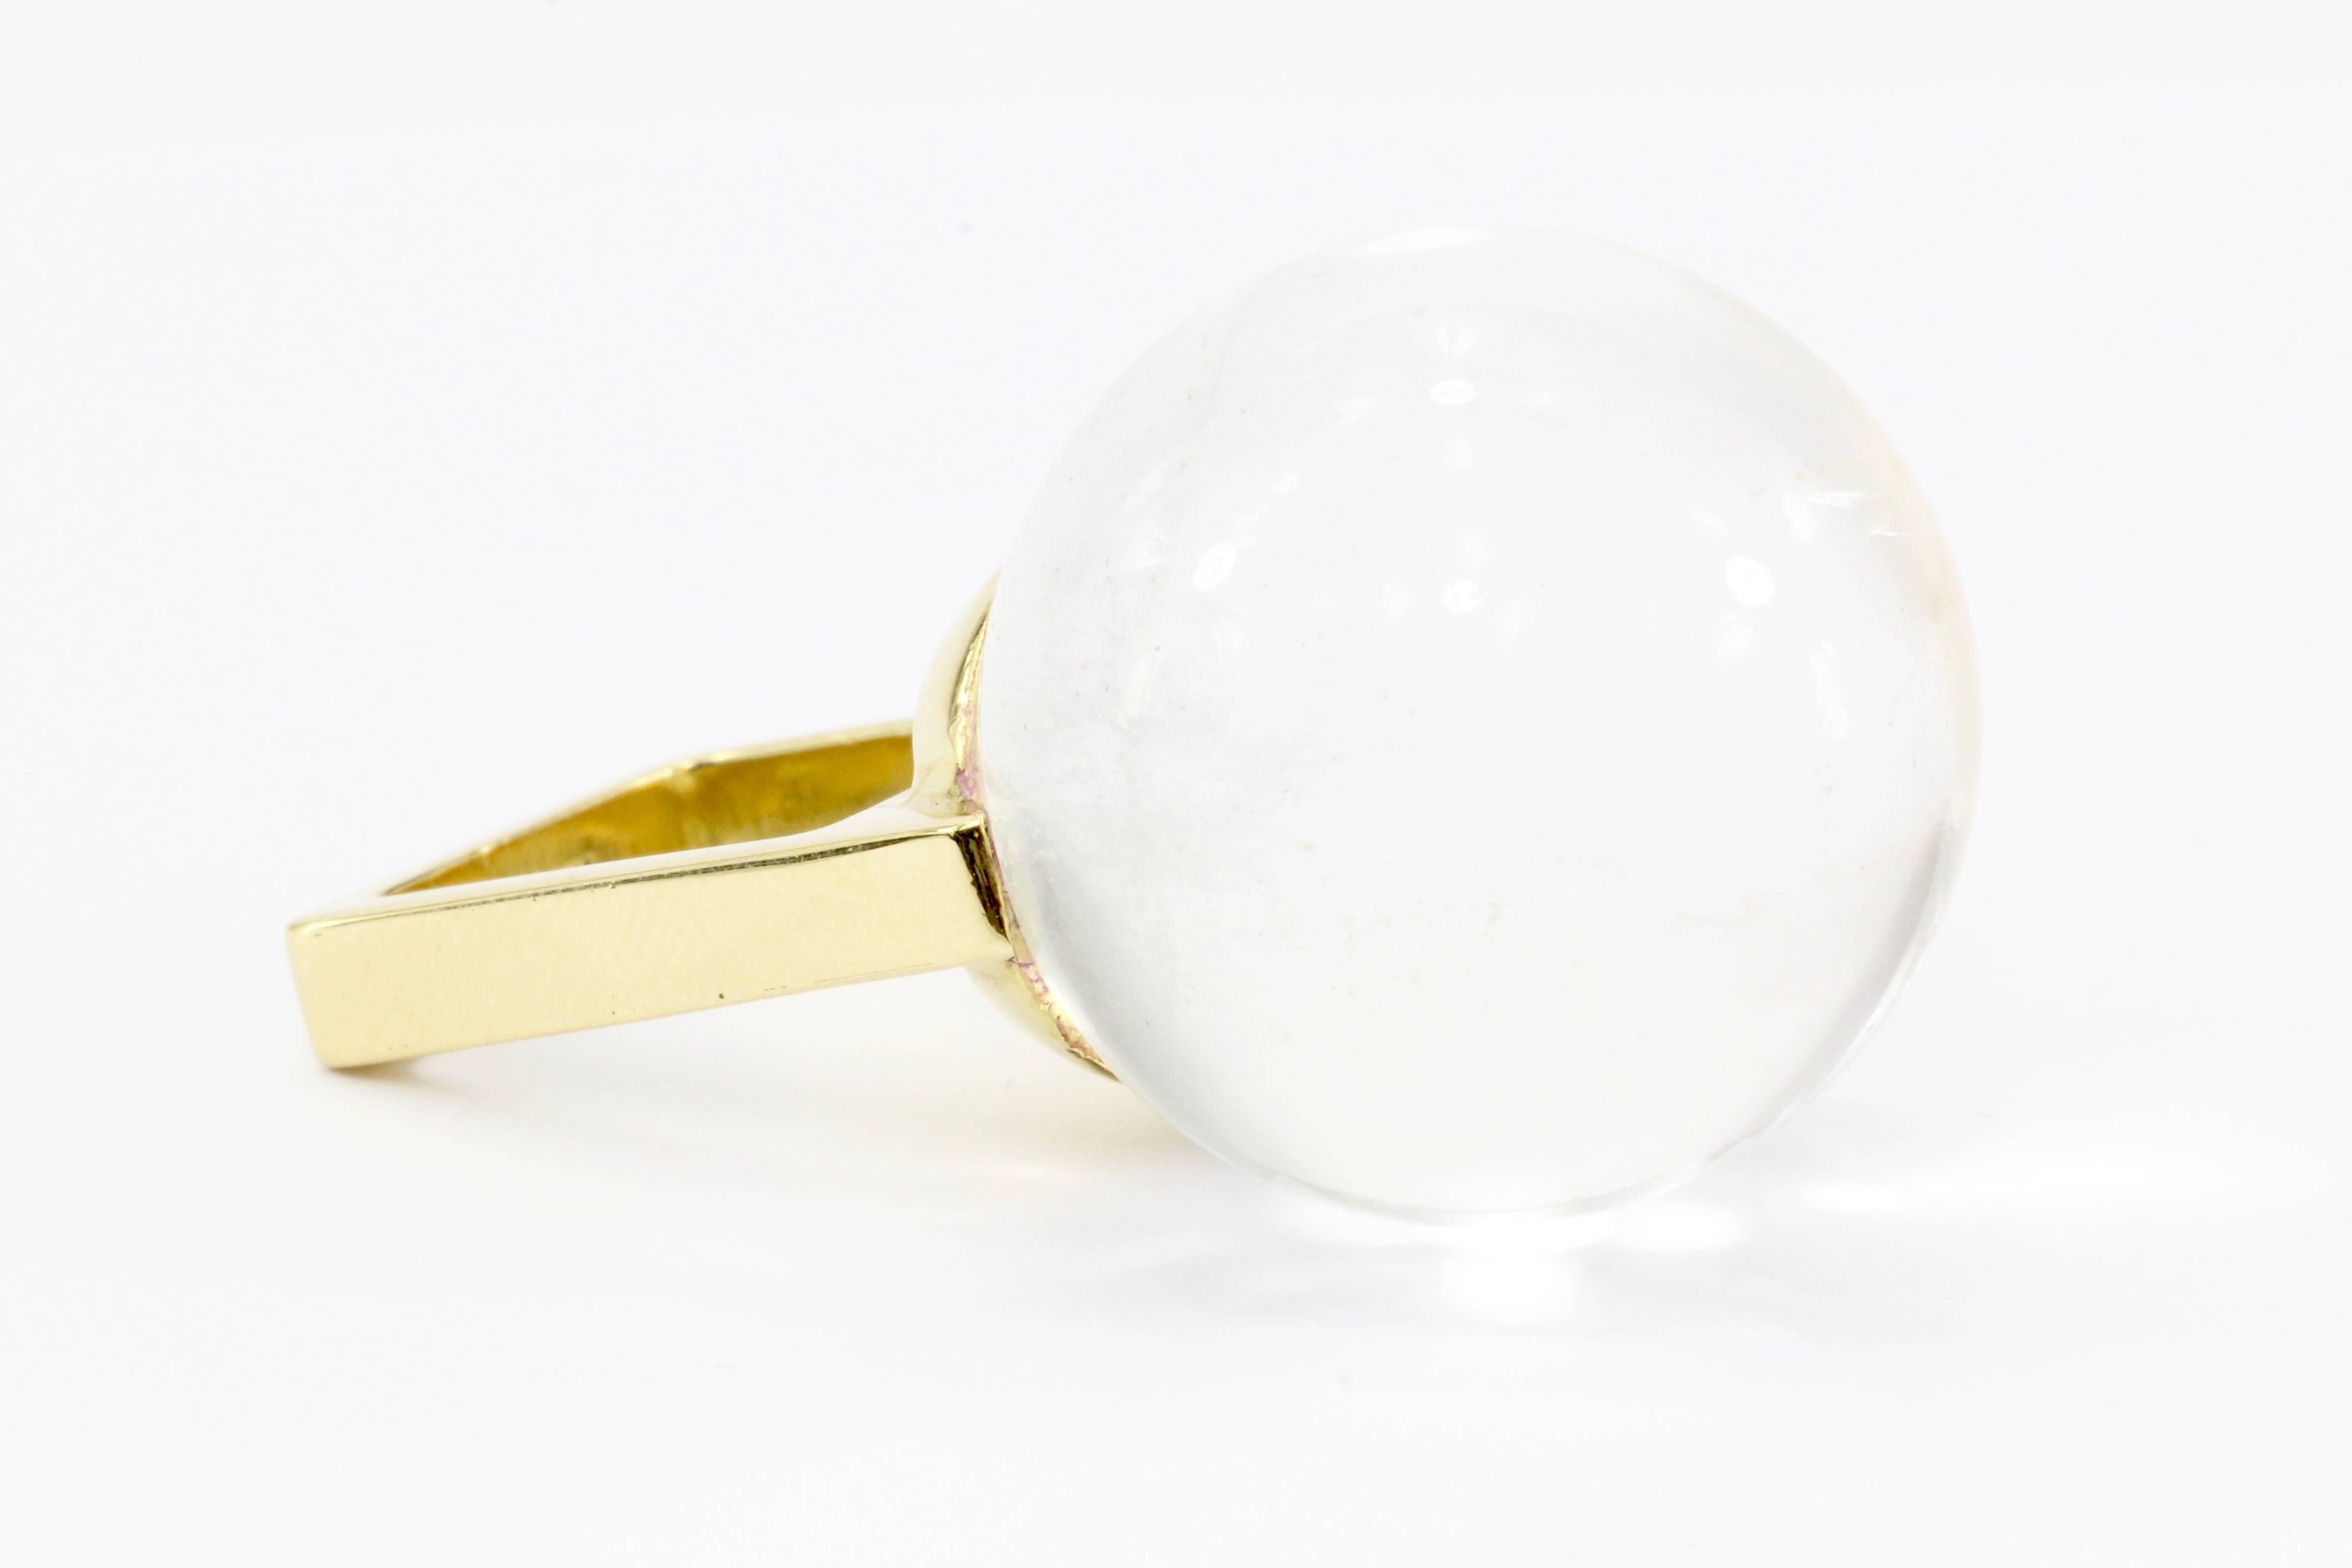 Era: c.1970's

Hallmarks: 18K

Composition: 18K Yellow Gold

Primary Stone: Clear Rock Crystal Quartz

Dimensions: approximately 25mm diameter

Shape: Spherical 

Ring Width: 25mm

Rise Above Finger: 28mm

Ring Size: 4 / 4.25 (square band)

Ring